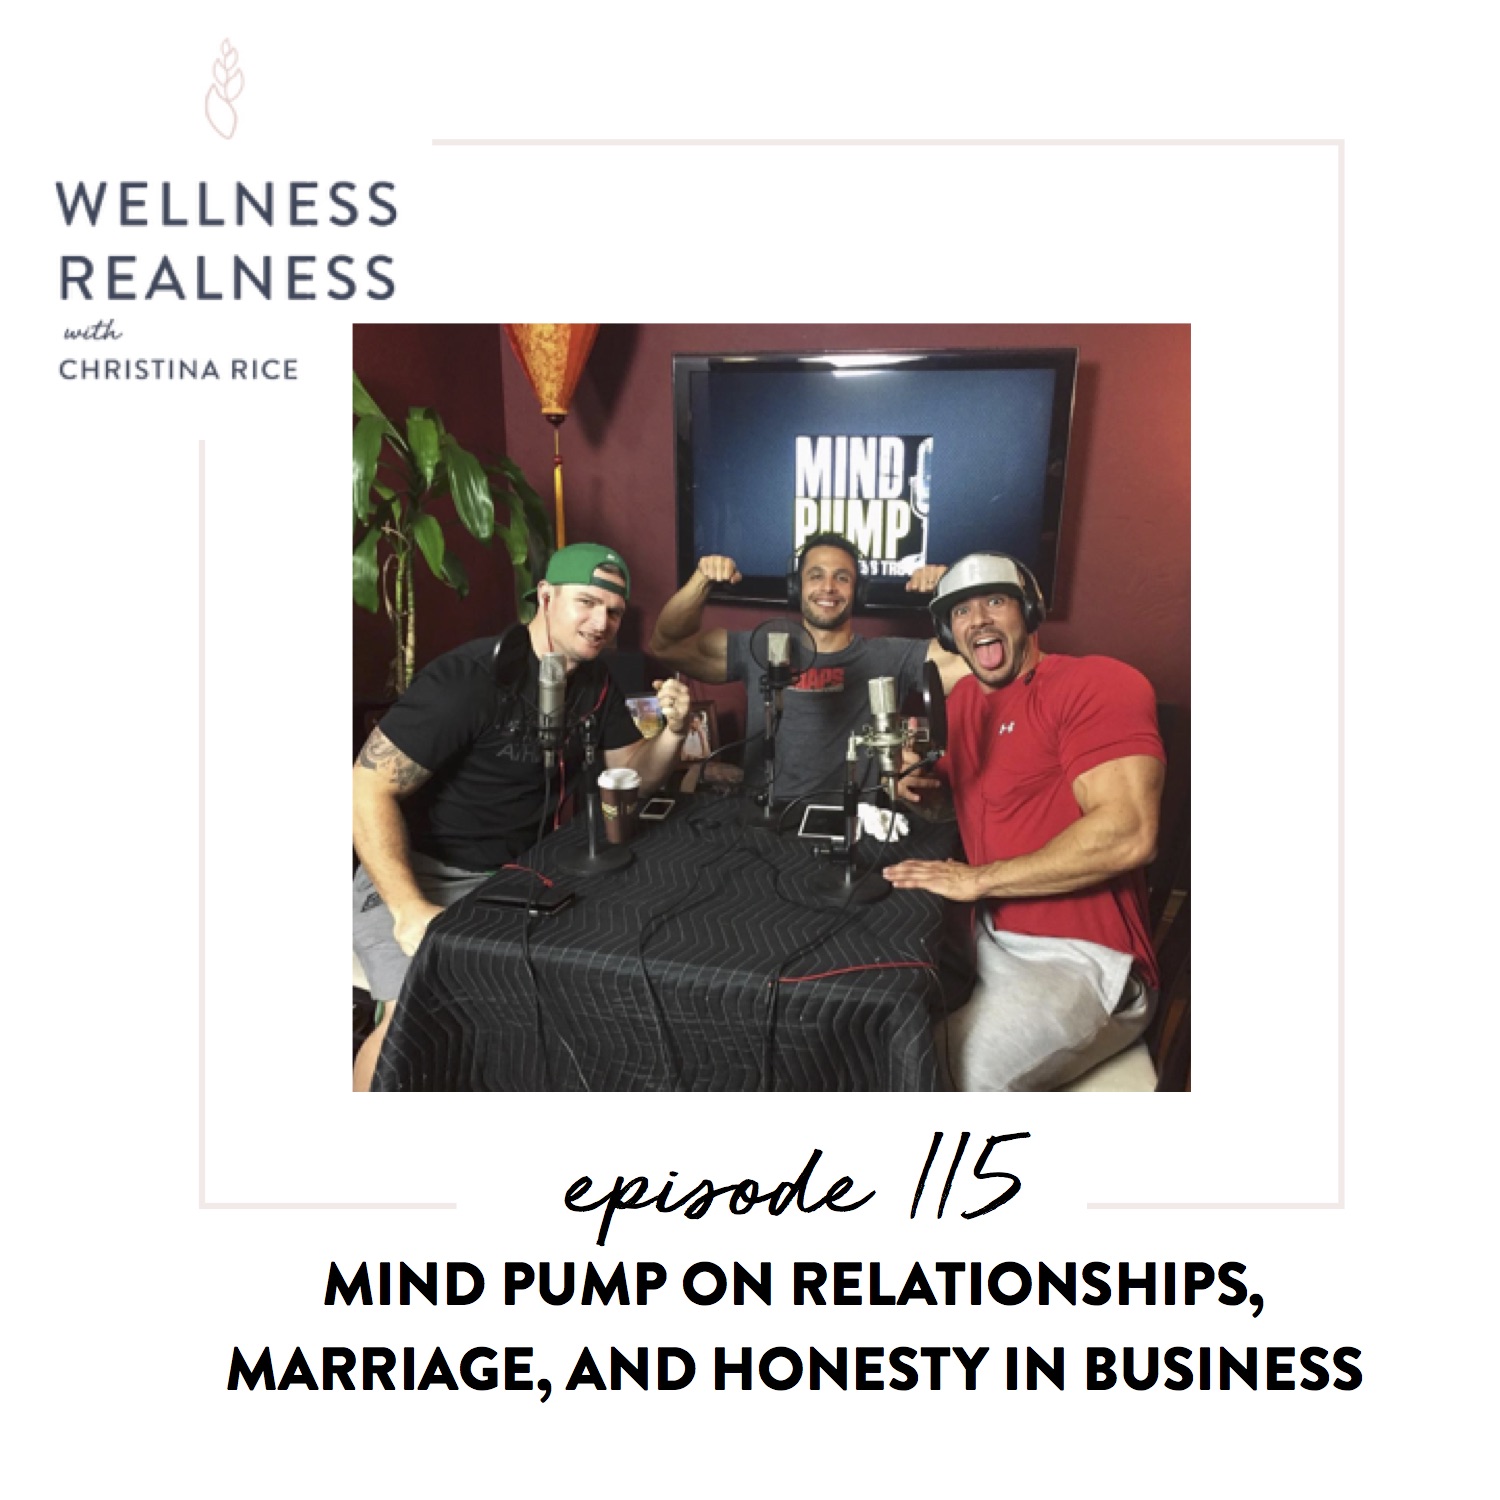 115: Mind Pump on Relationships, Marriage, and Honesty in Business